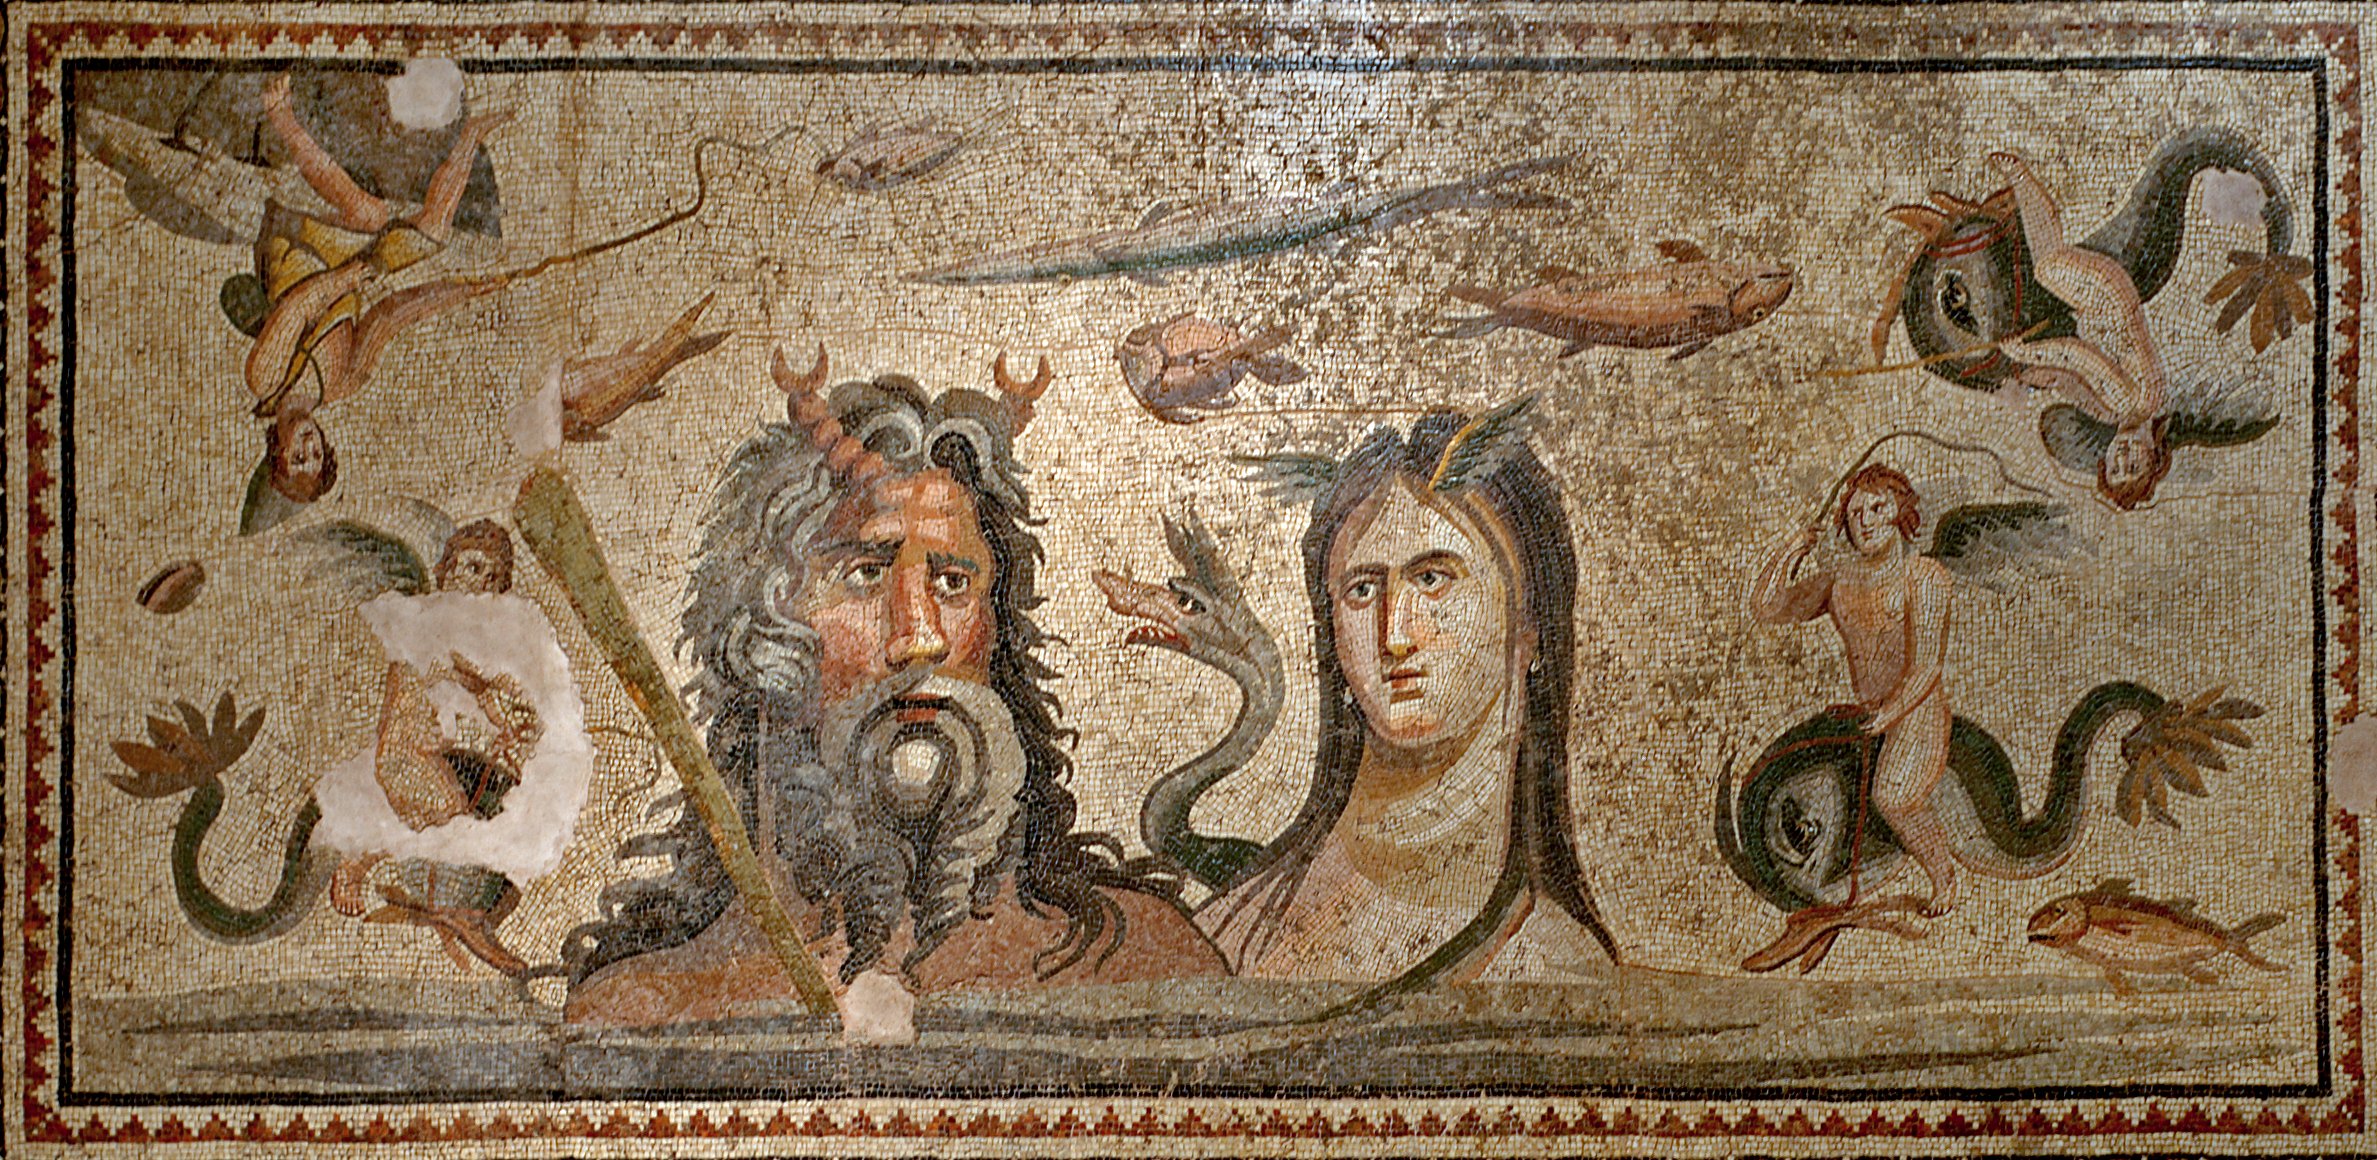 See beautiful ancient mosaics like this one depicting gods Oceanus and Tethys at the Zeugma Museum in Gaziantep. (iStock Photo)